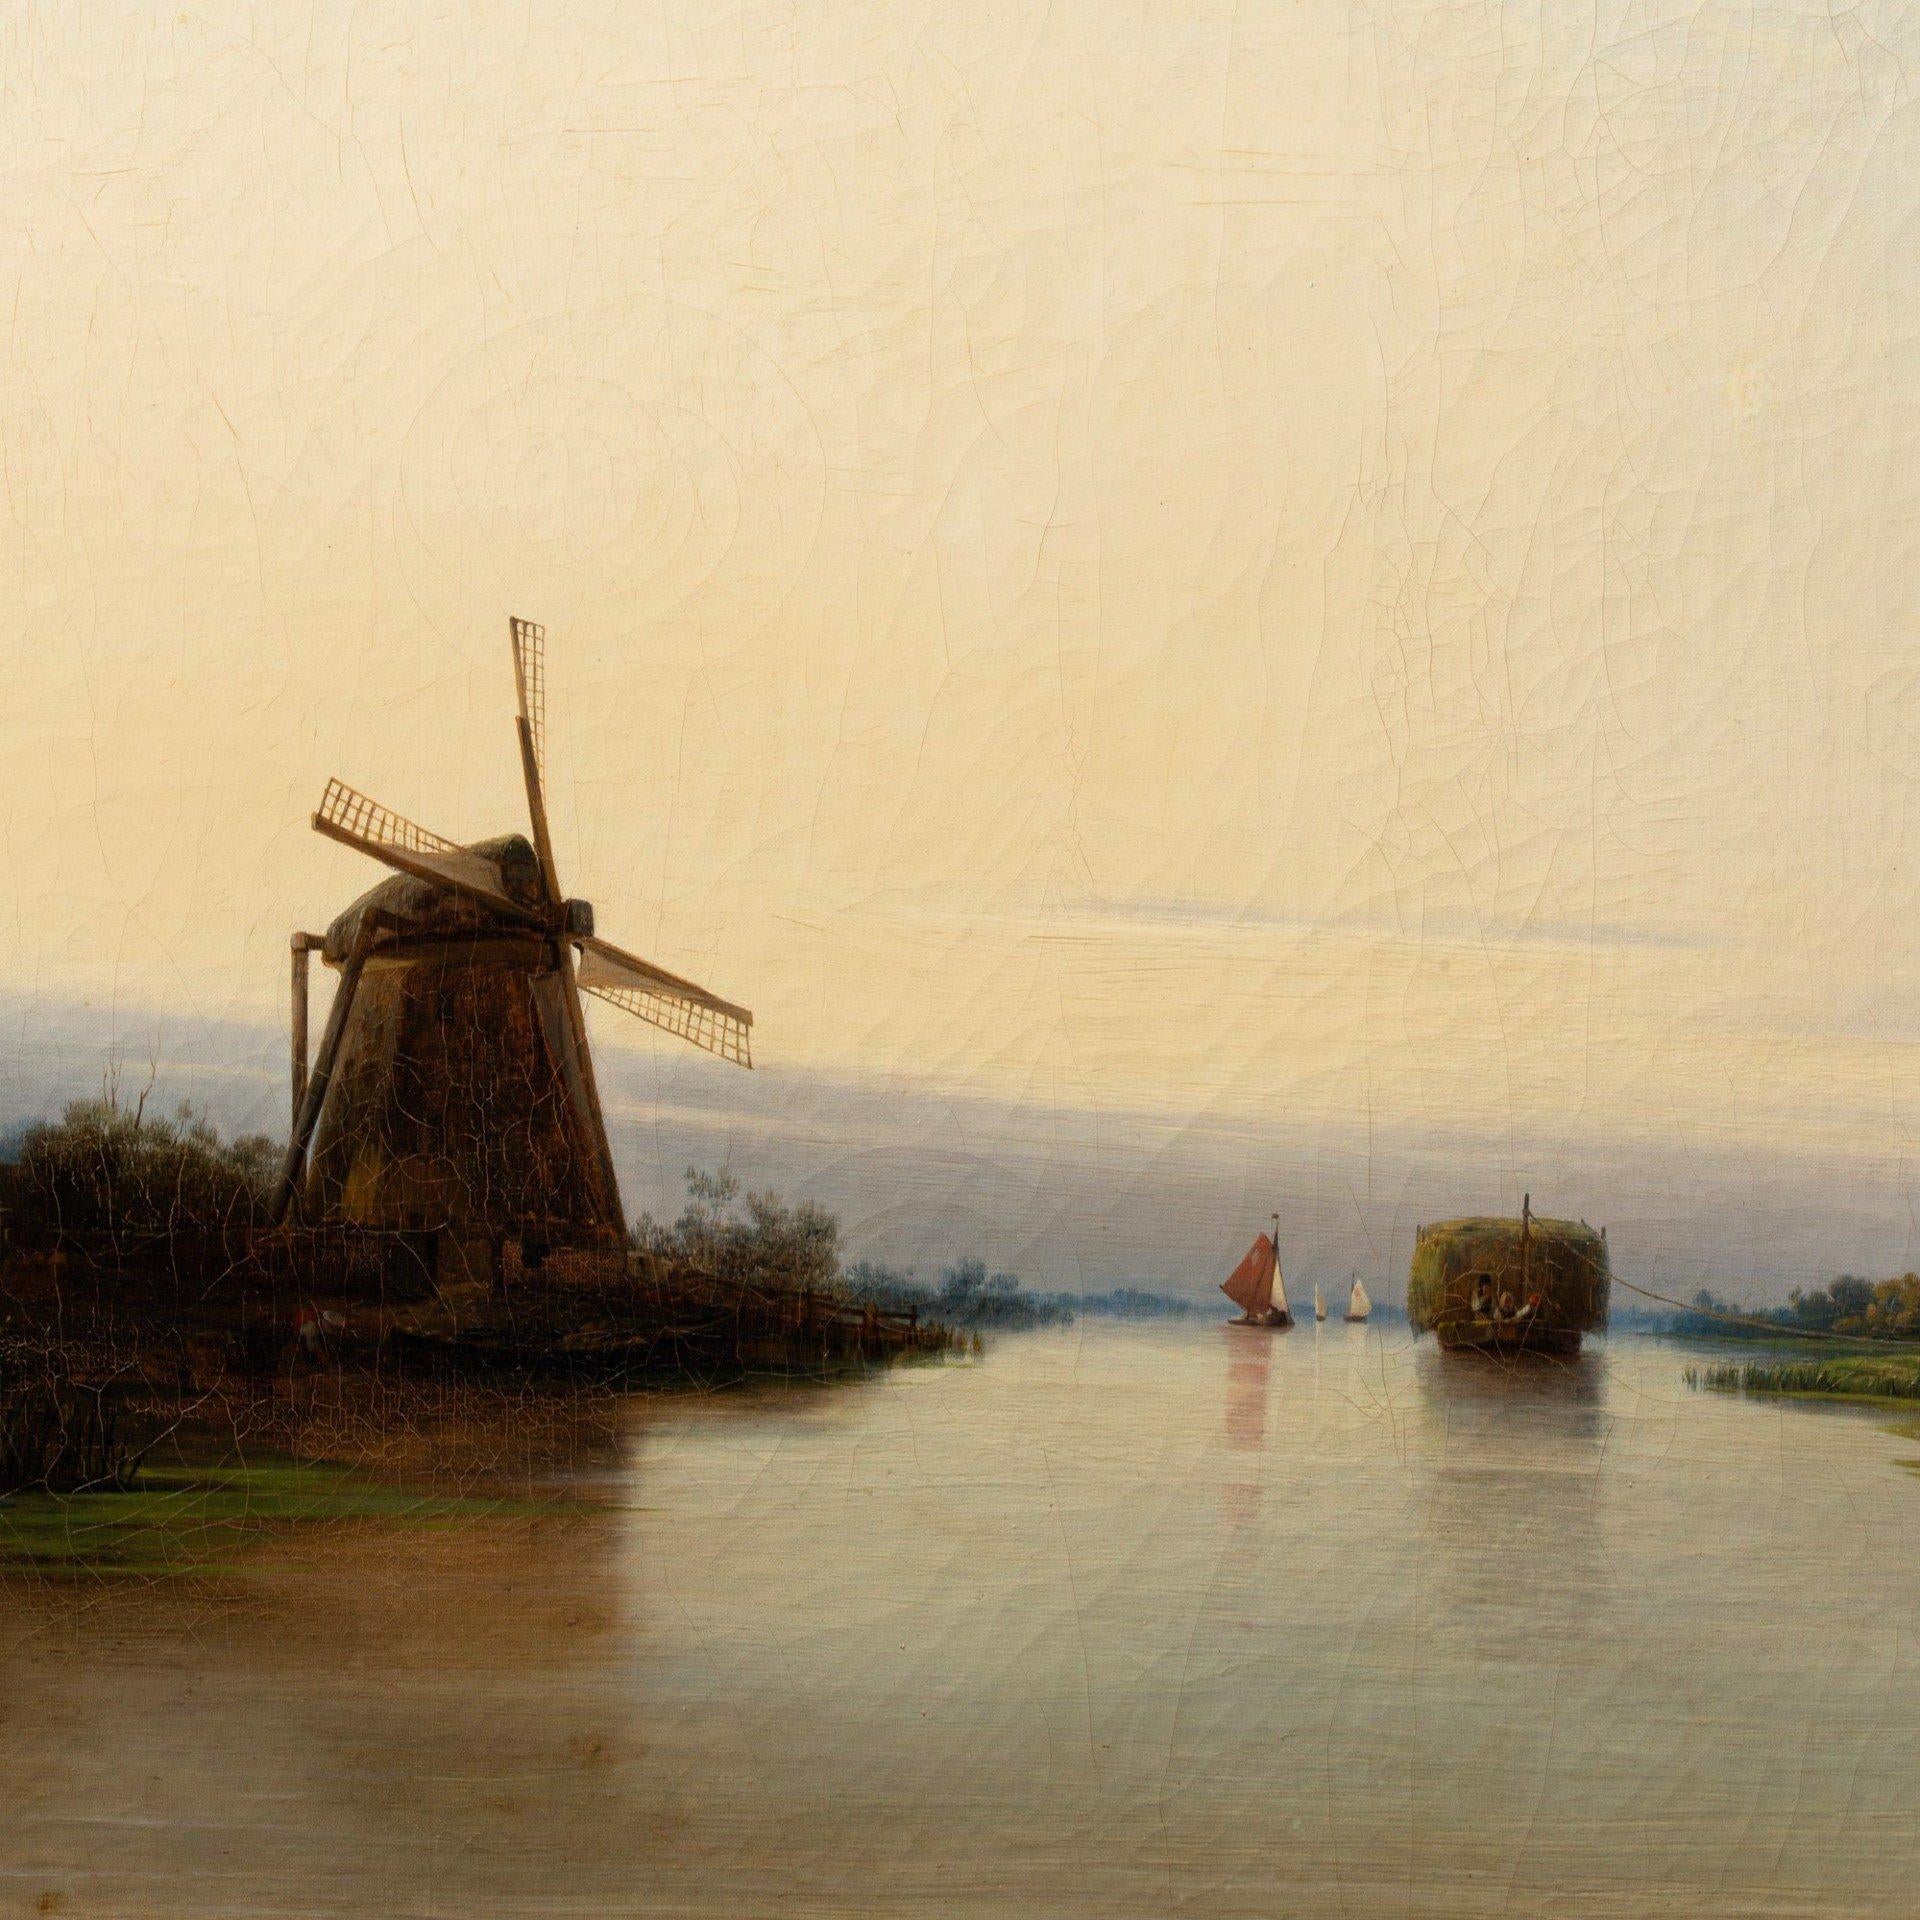 River landscape with mill, 1839
Dimensions: 51 x 70 cm (canvas)
Oil on canvas (original canvas),
Signed and dated lower left
Canvas by Legendre

Wickenberg was born in Malmö, Sweden. He was the son of an army officer. He showed an early talent for